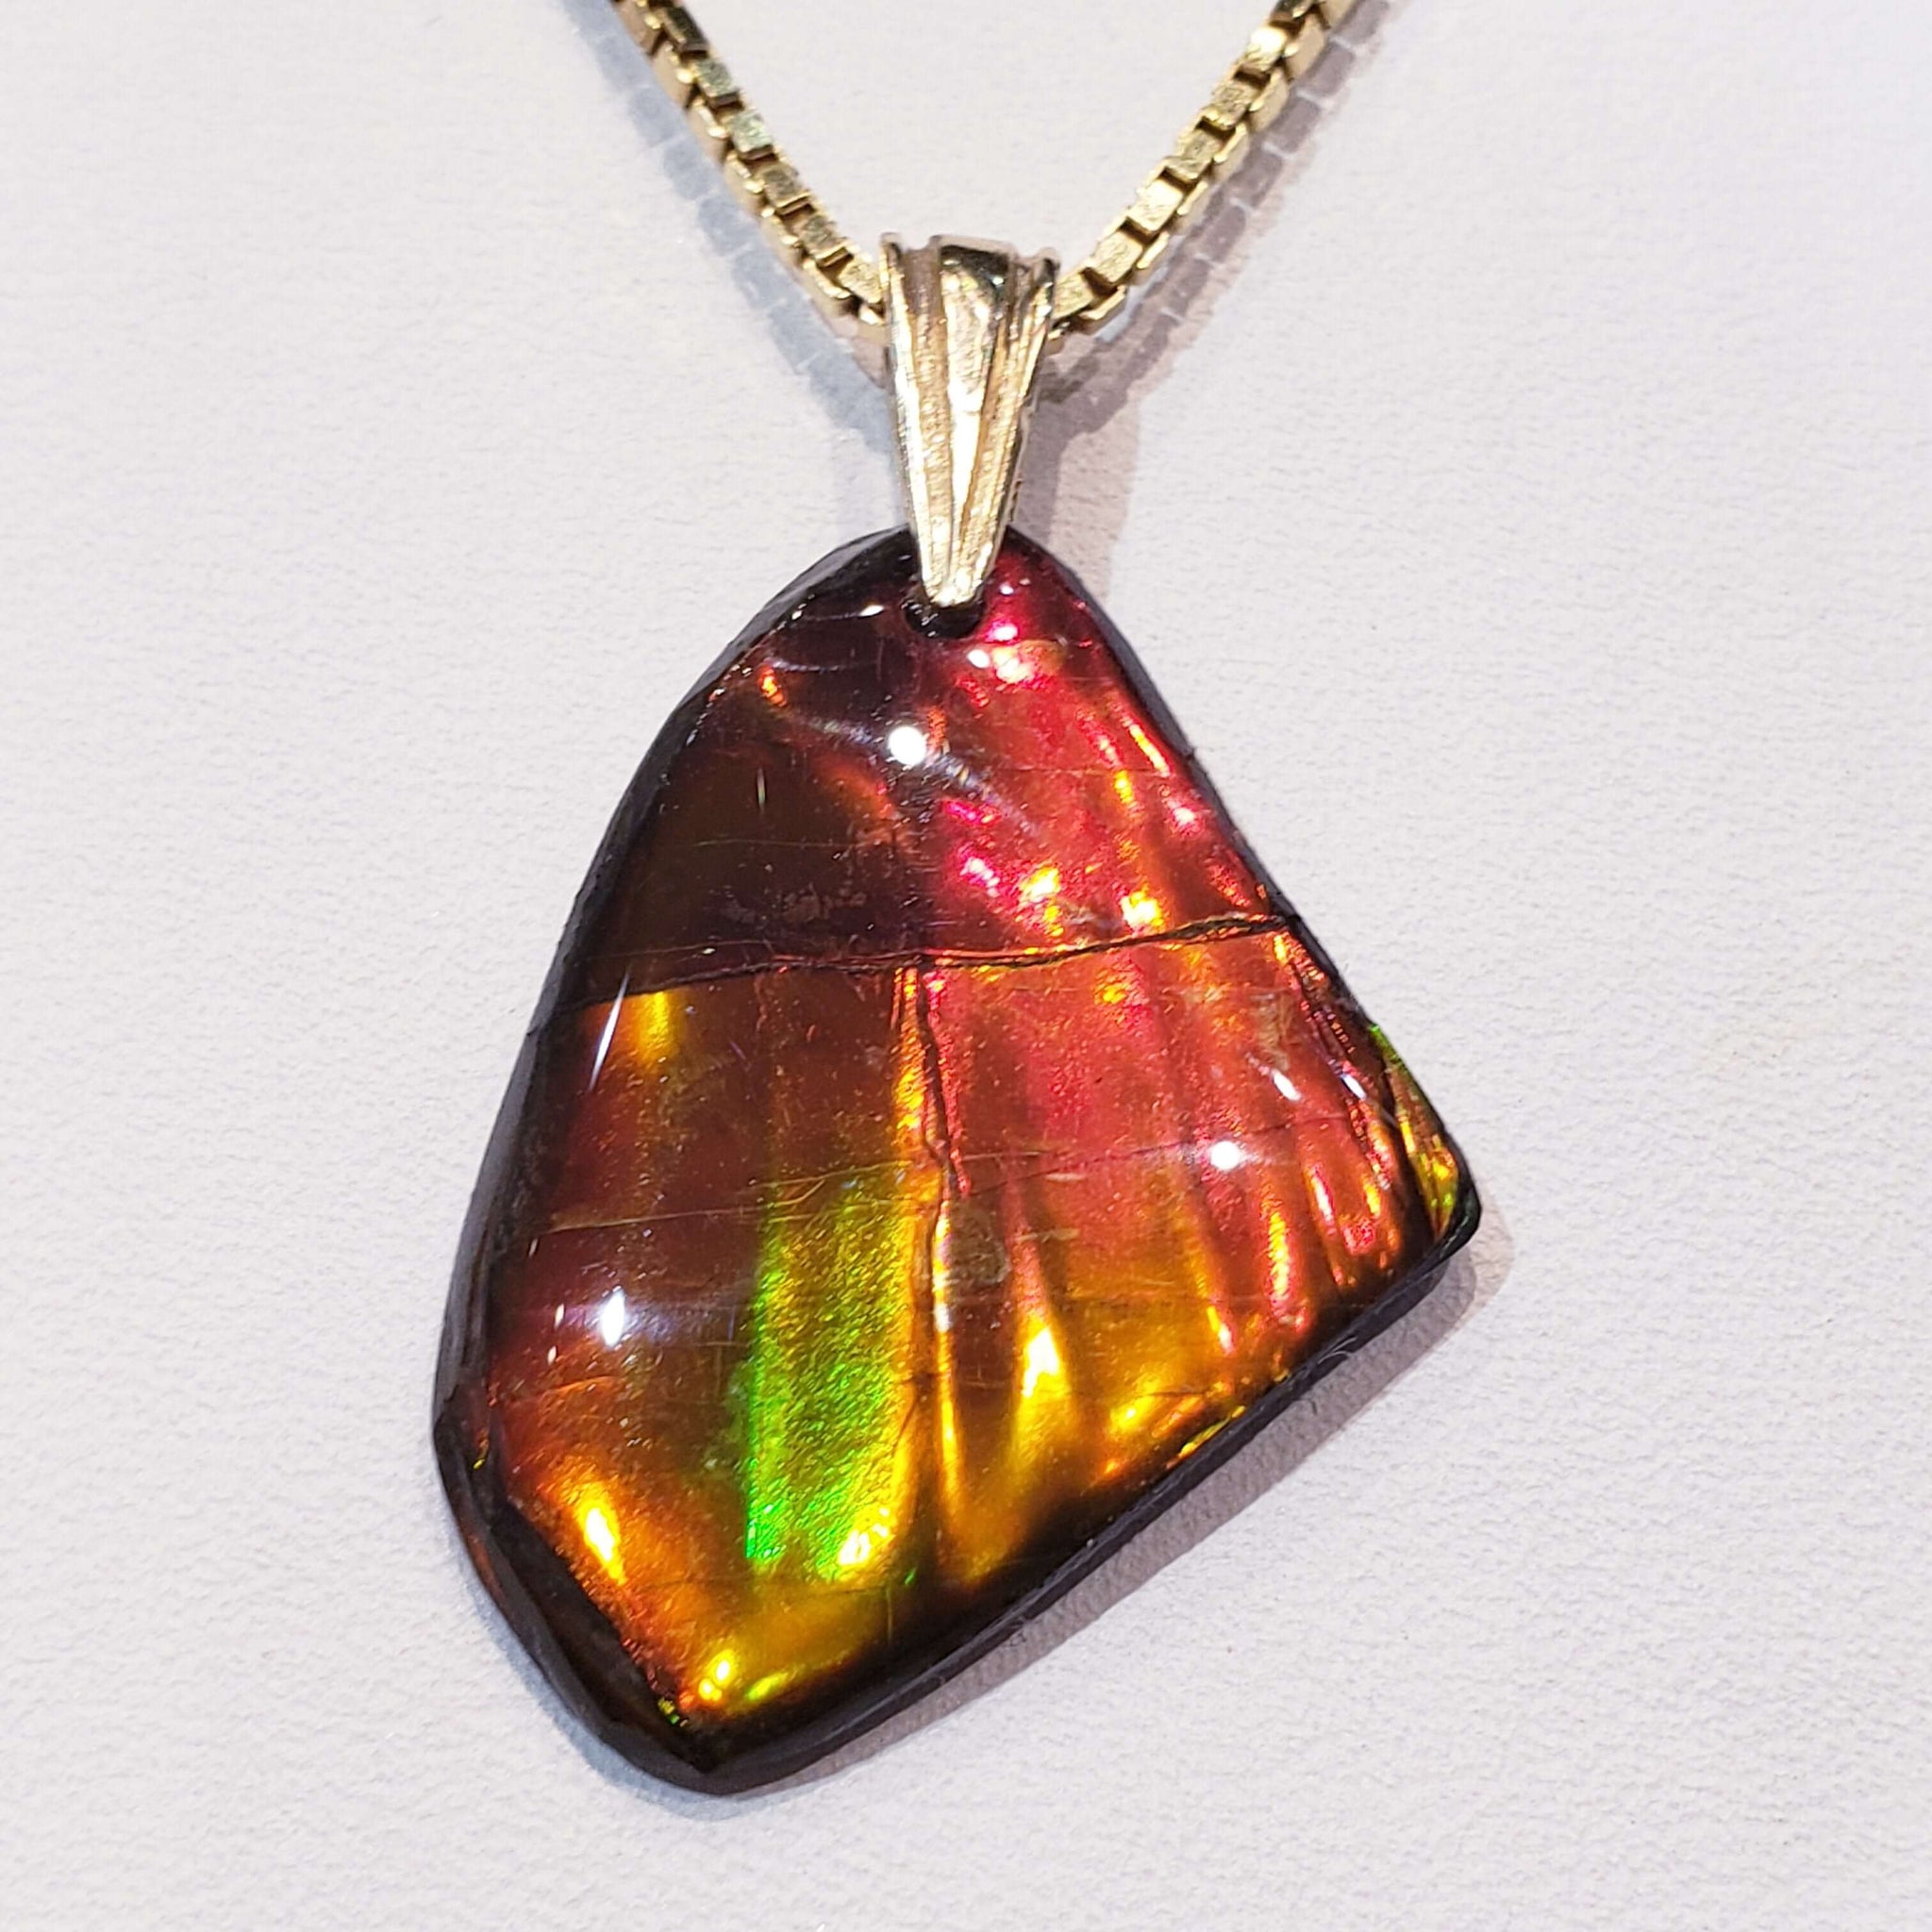 Ammolite Freeform Set in 14KYG with Ripple Pattern PN. E21193 %product from Empire Ammolite